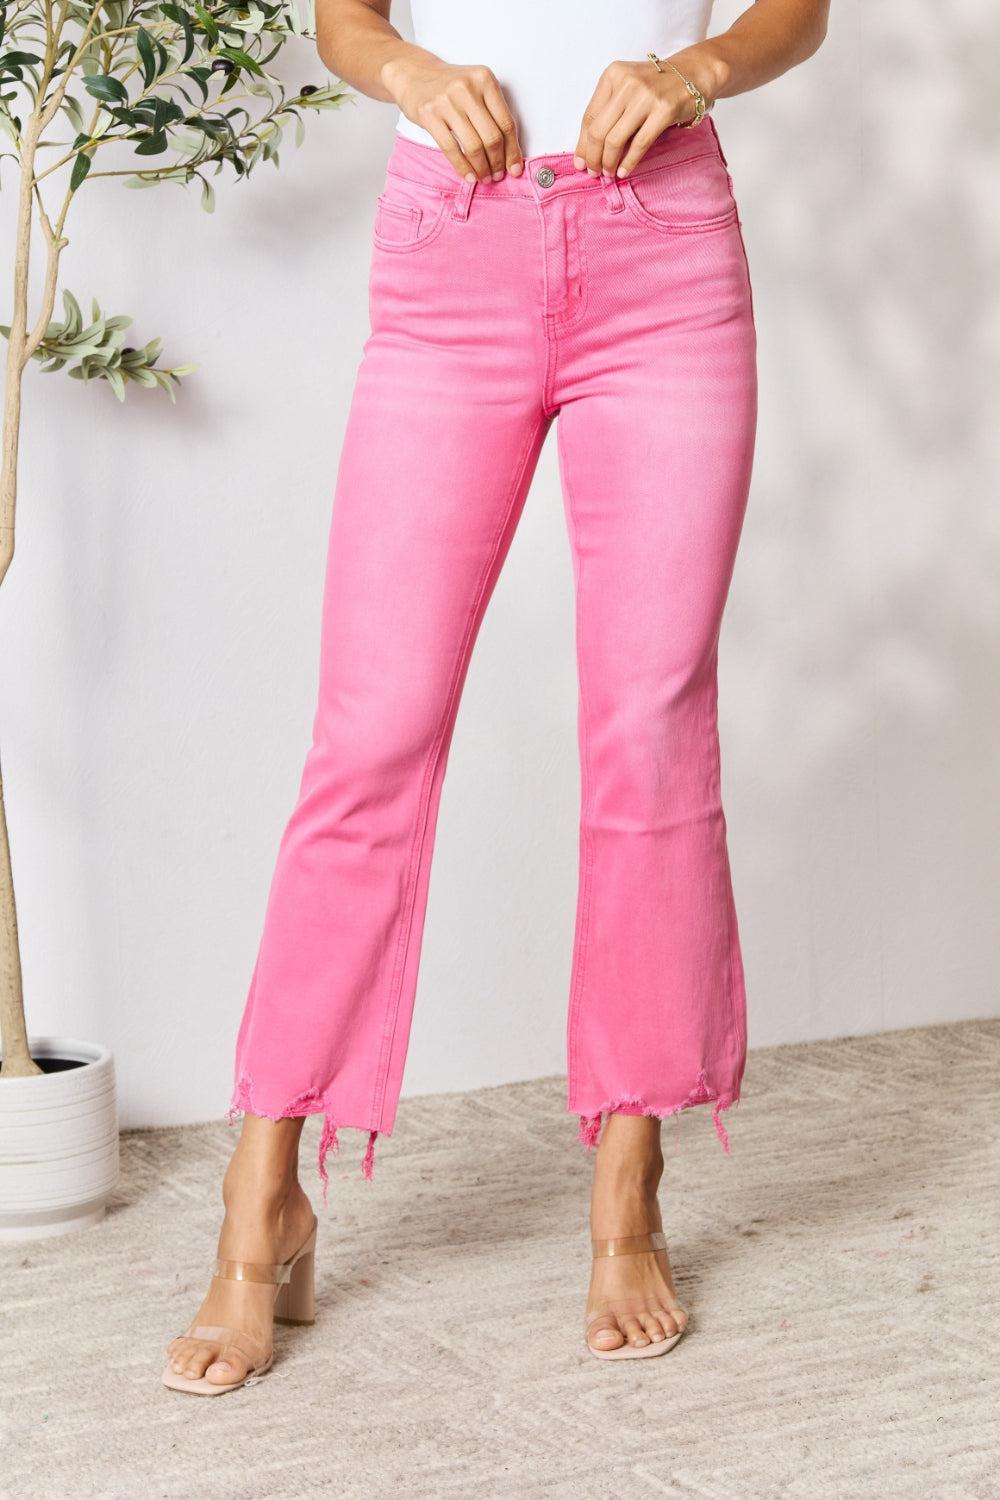 a woman in a white shirt and pink jeans